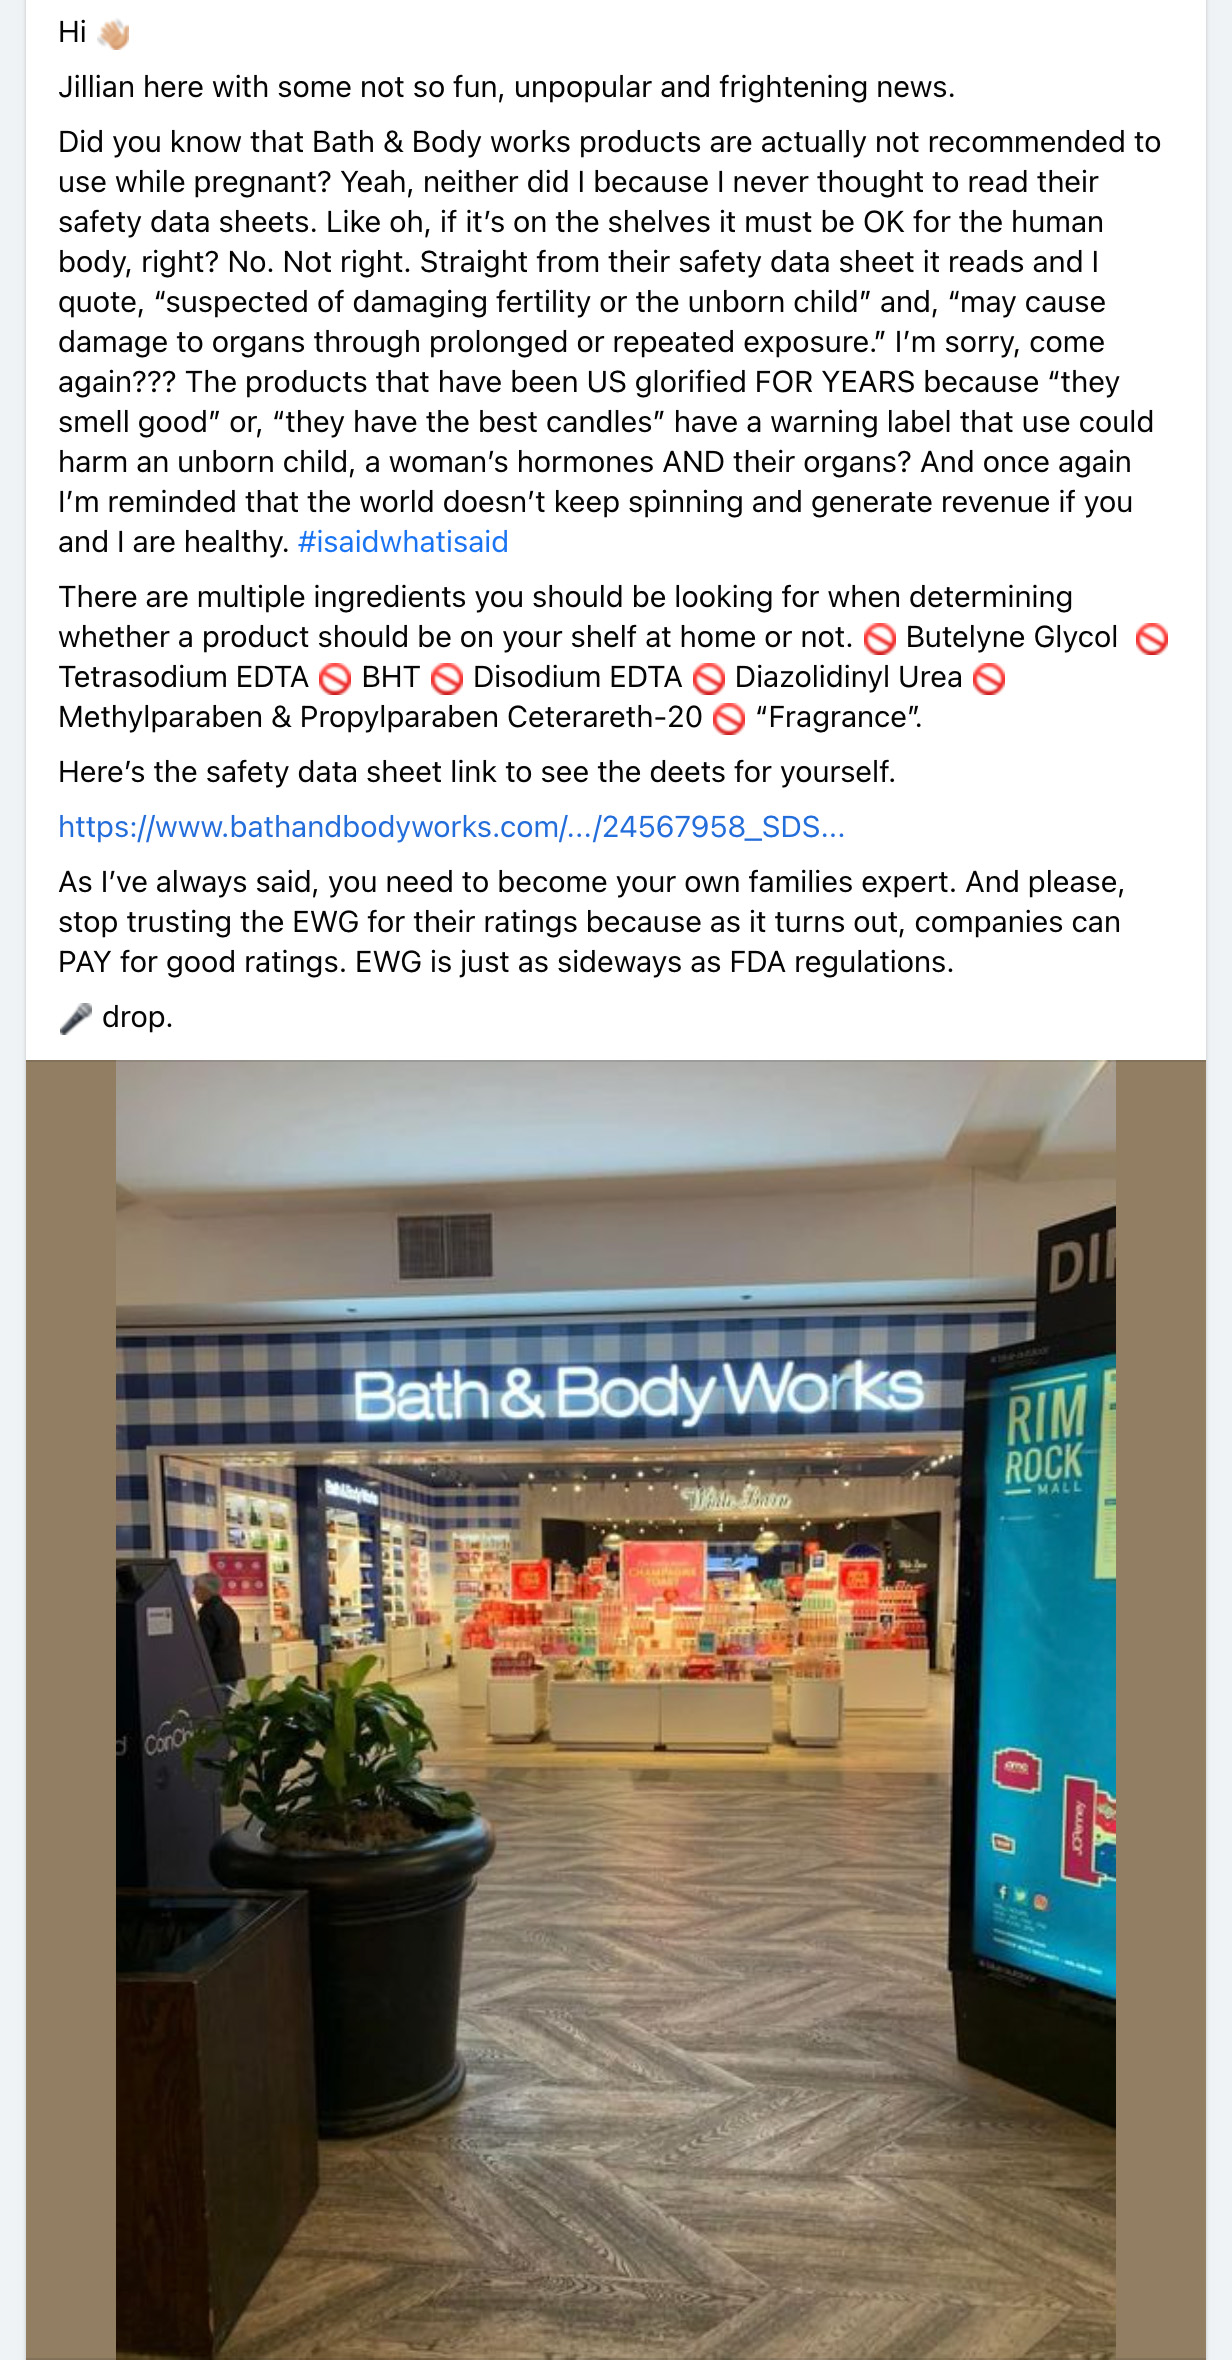 A viral Facebook post appeared to claim that Bath & Body Works products cause infertility and damage to organs and referenced a safety data sheet and also said that EWG ratings are purchased.